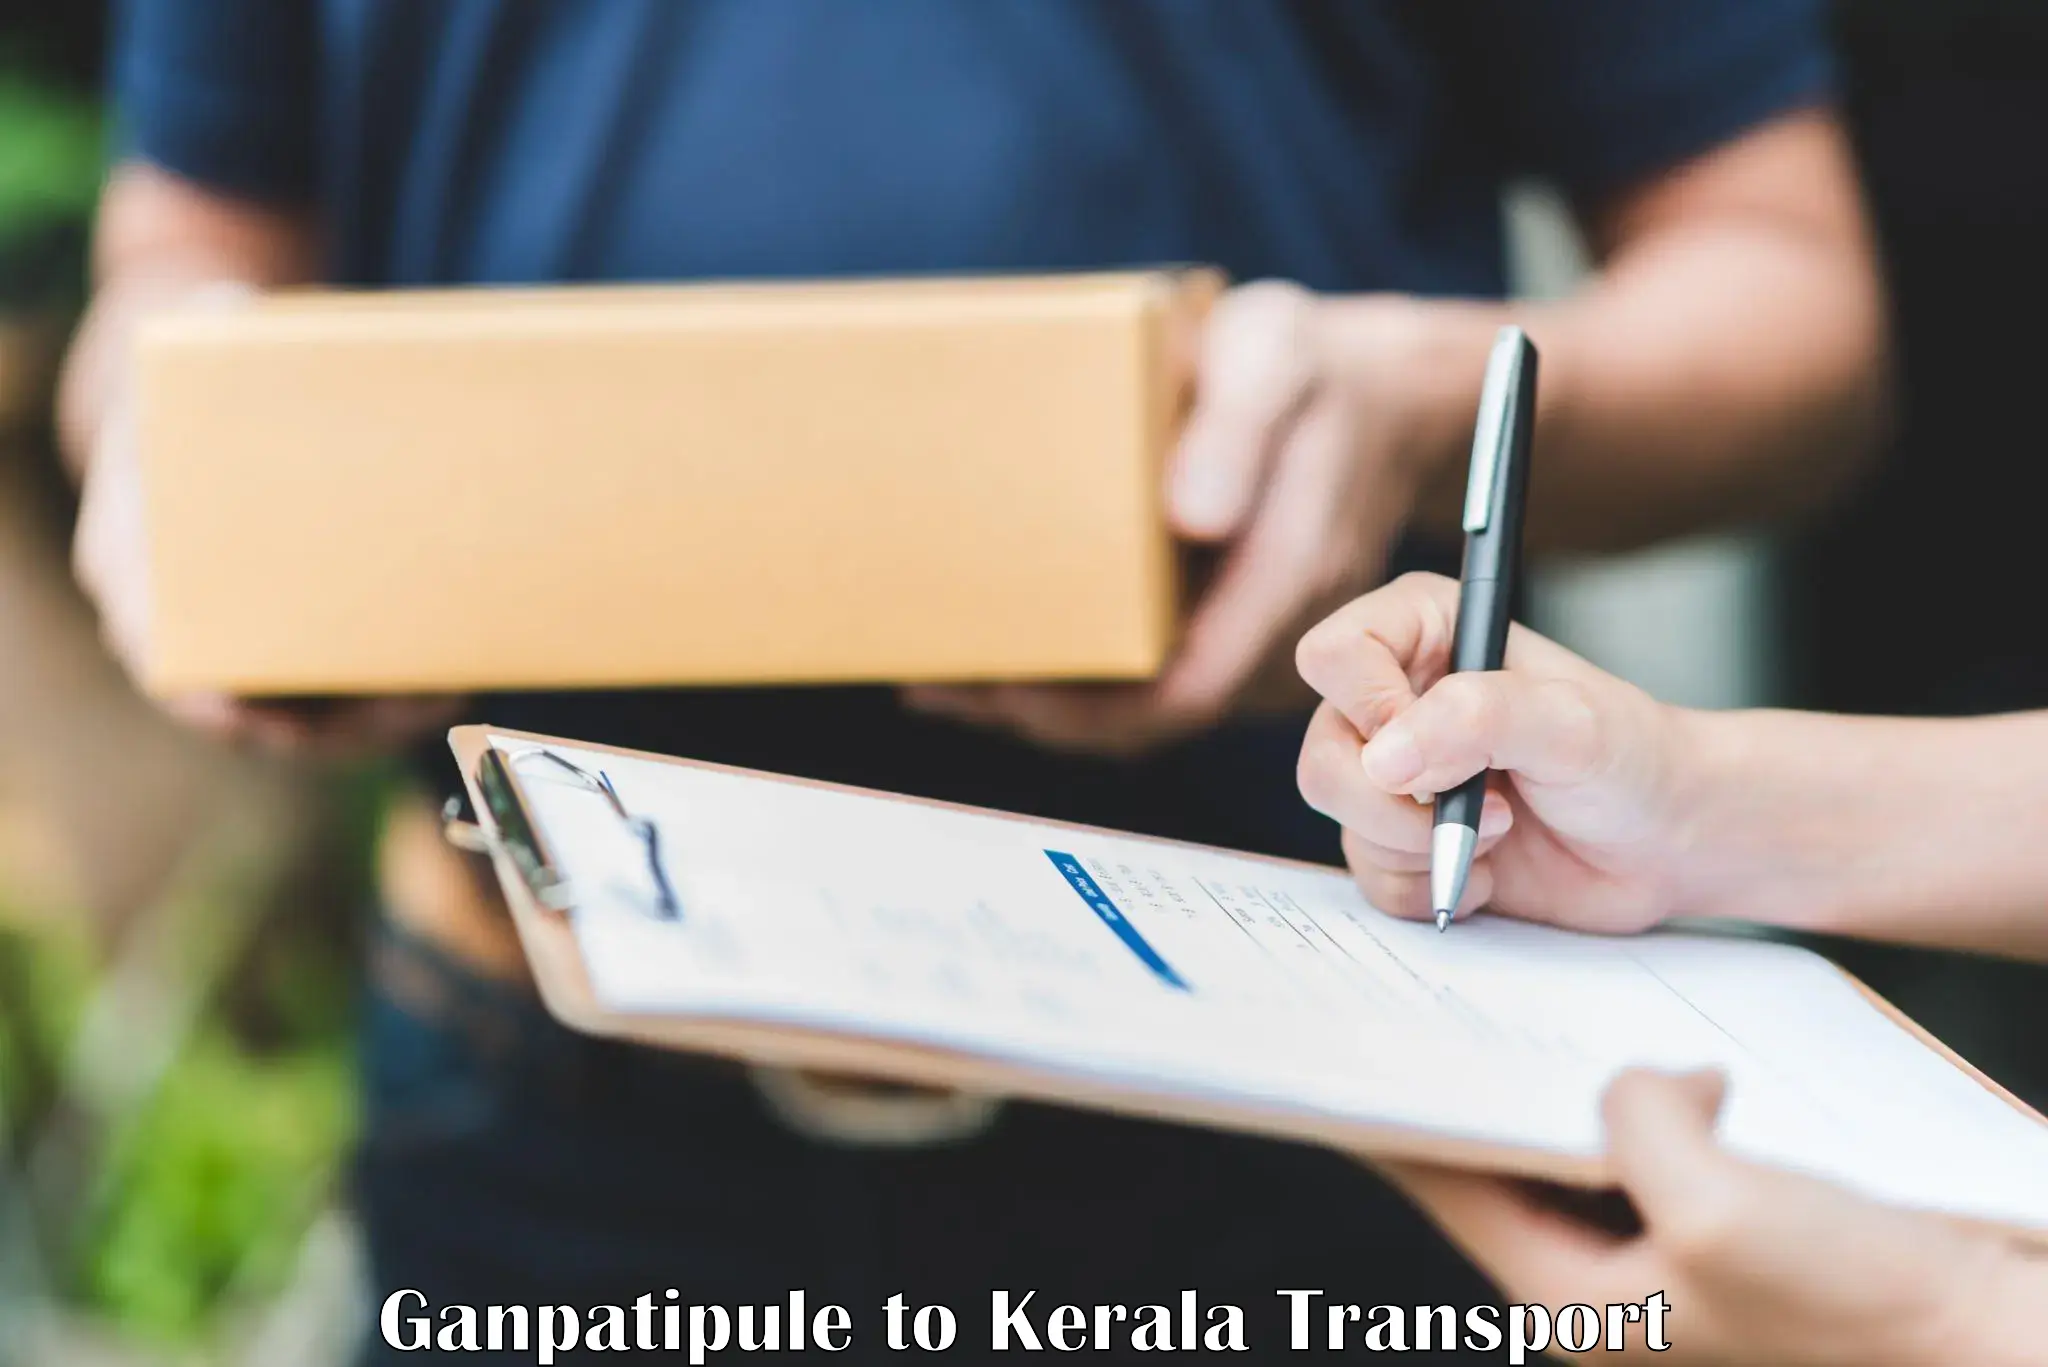 Container transport service Ganpatipule to Chalakudy